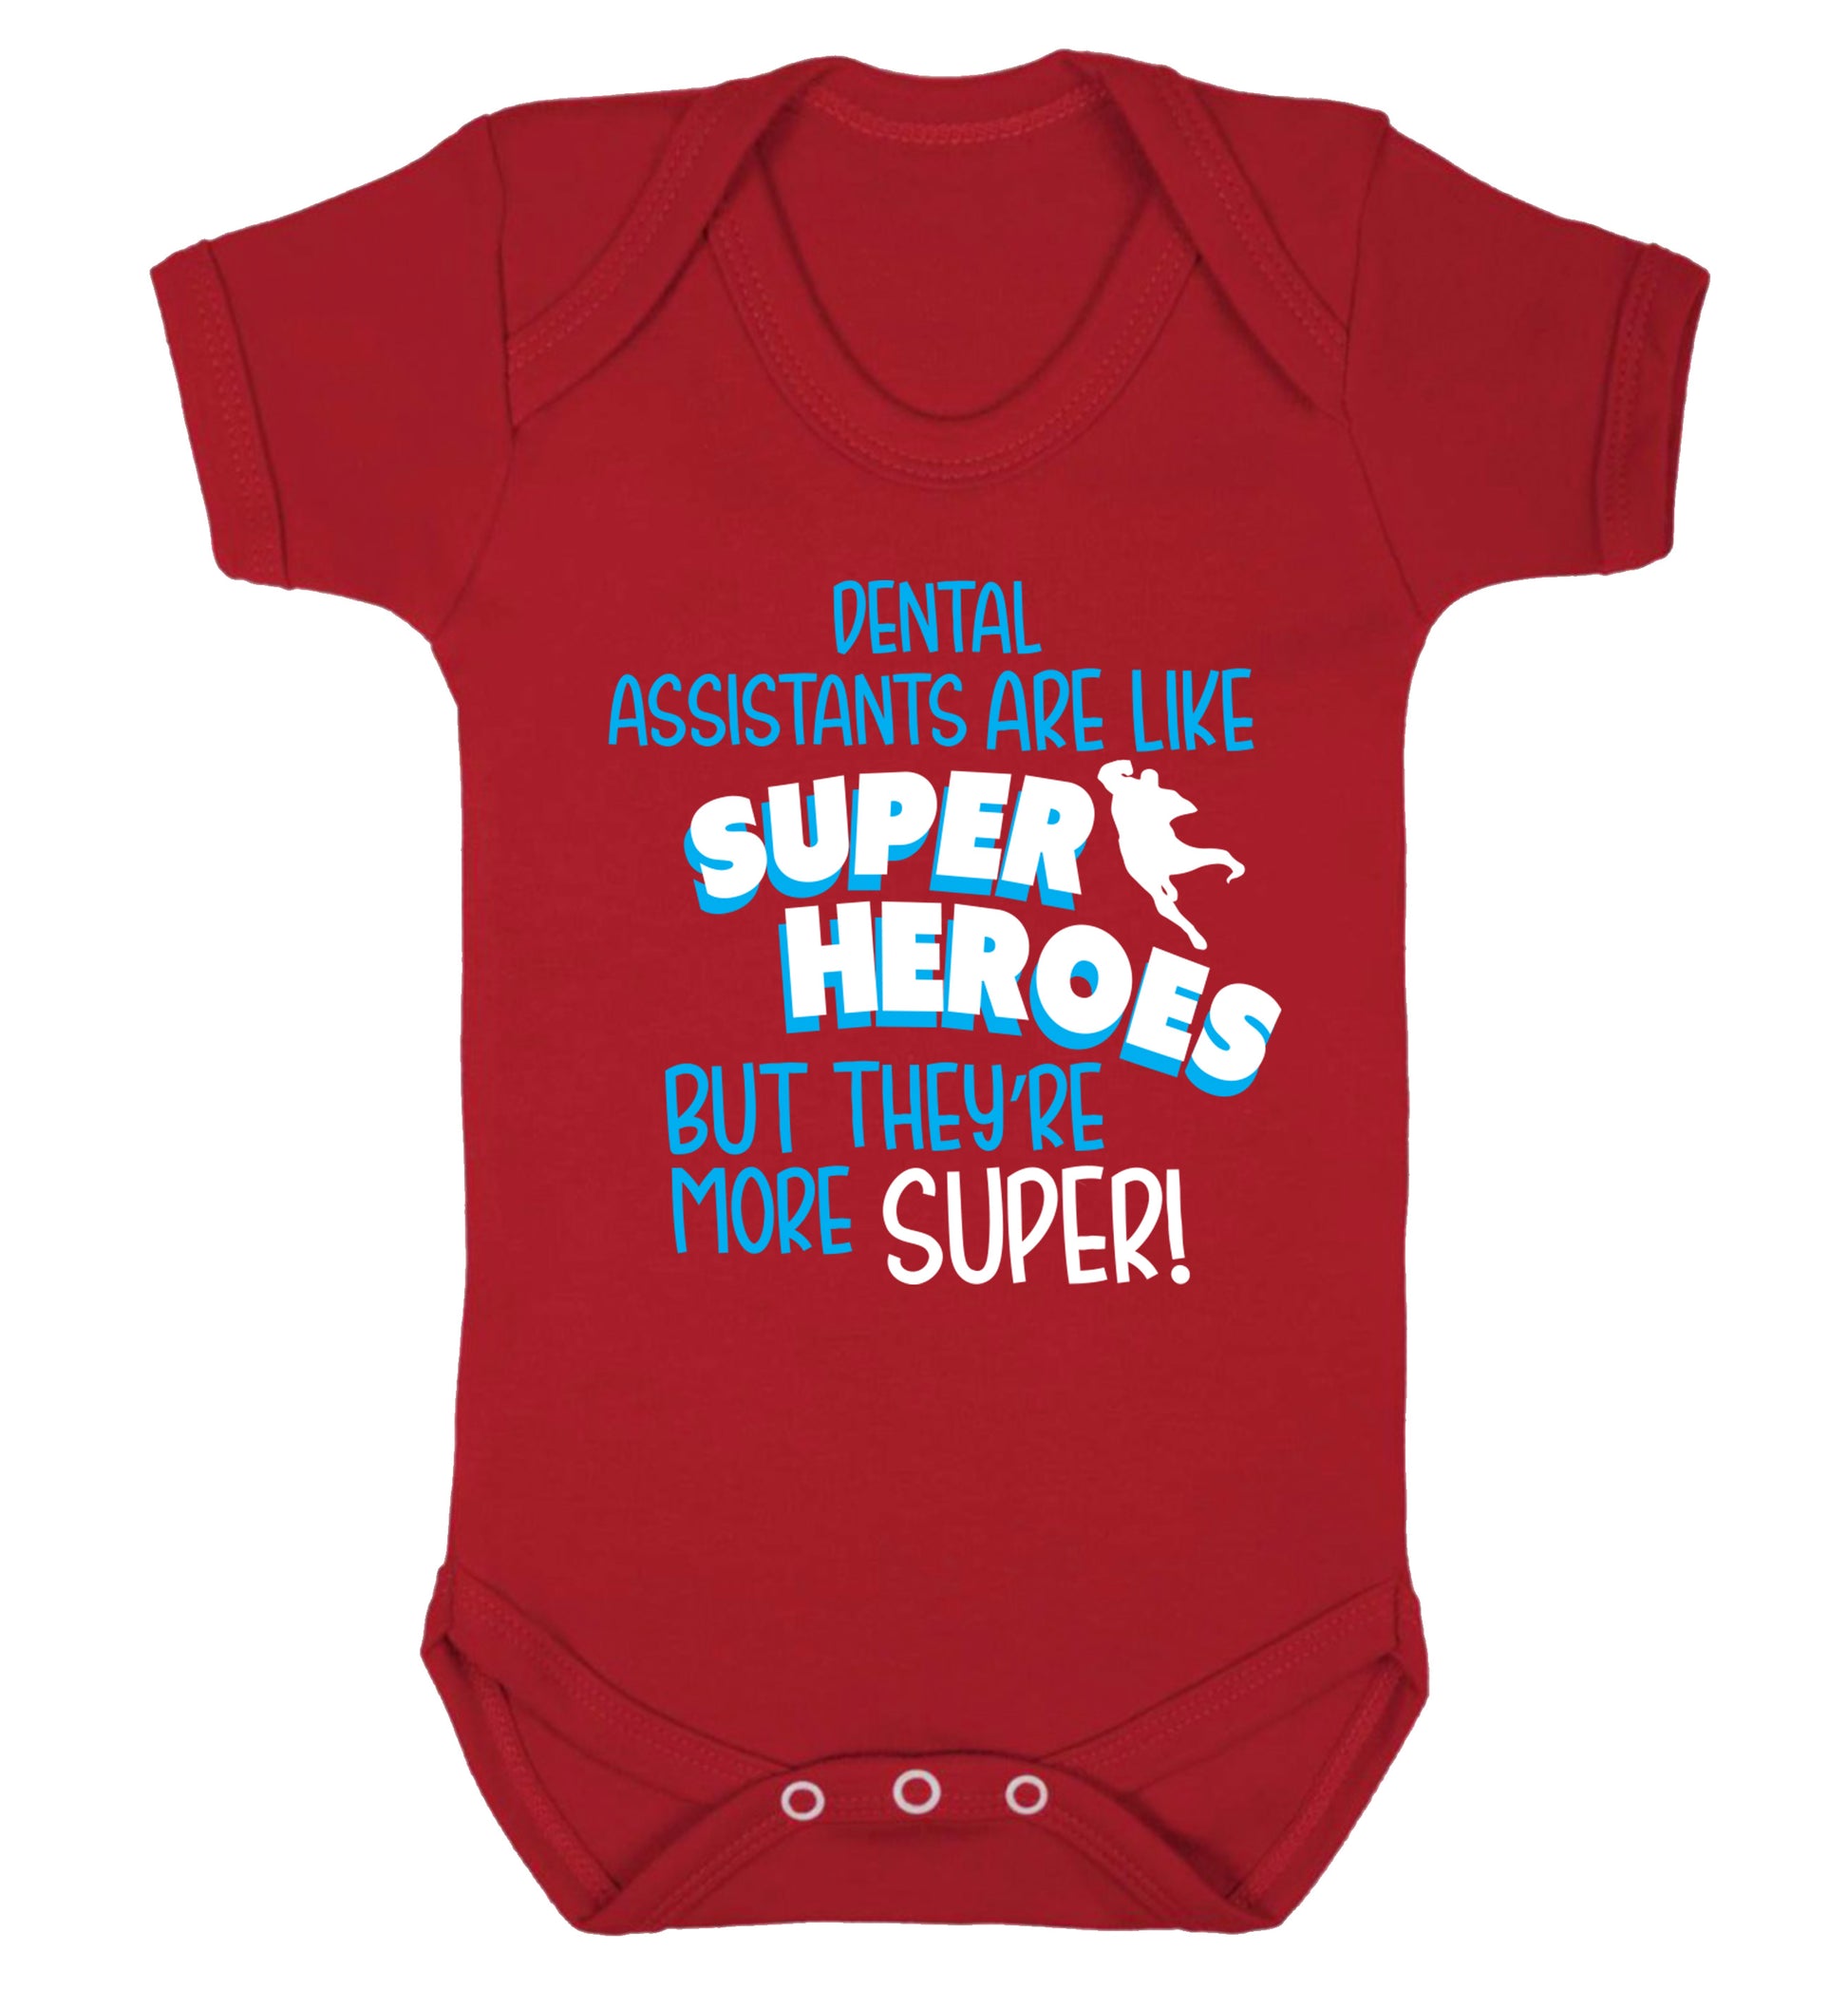 Dental Assistants are like superheros but they're more super Baby Vest red 18-24 months